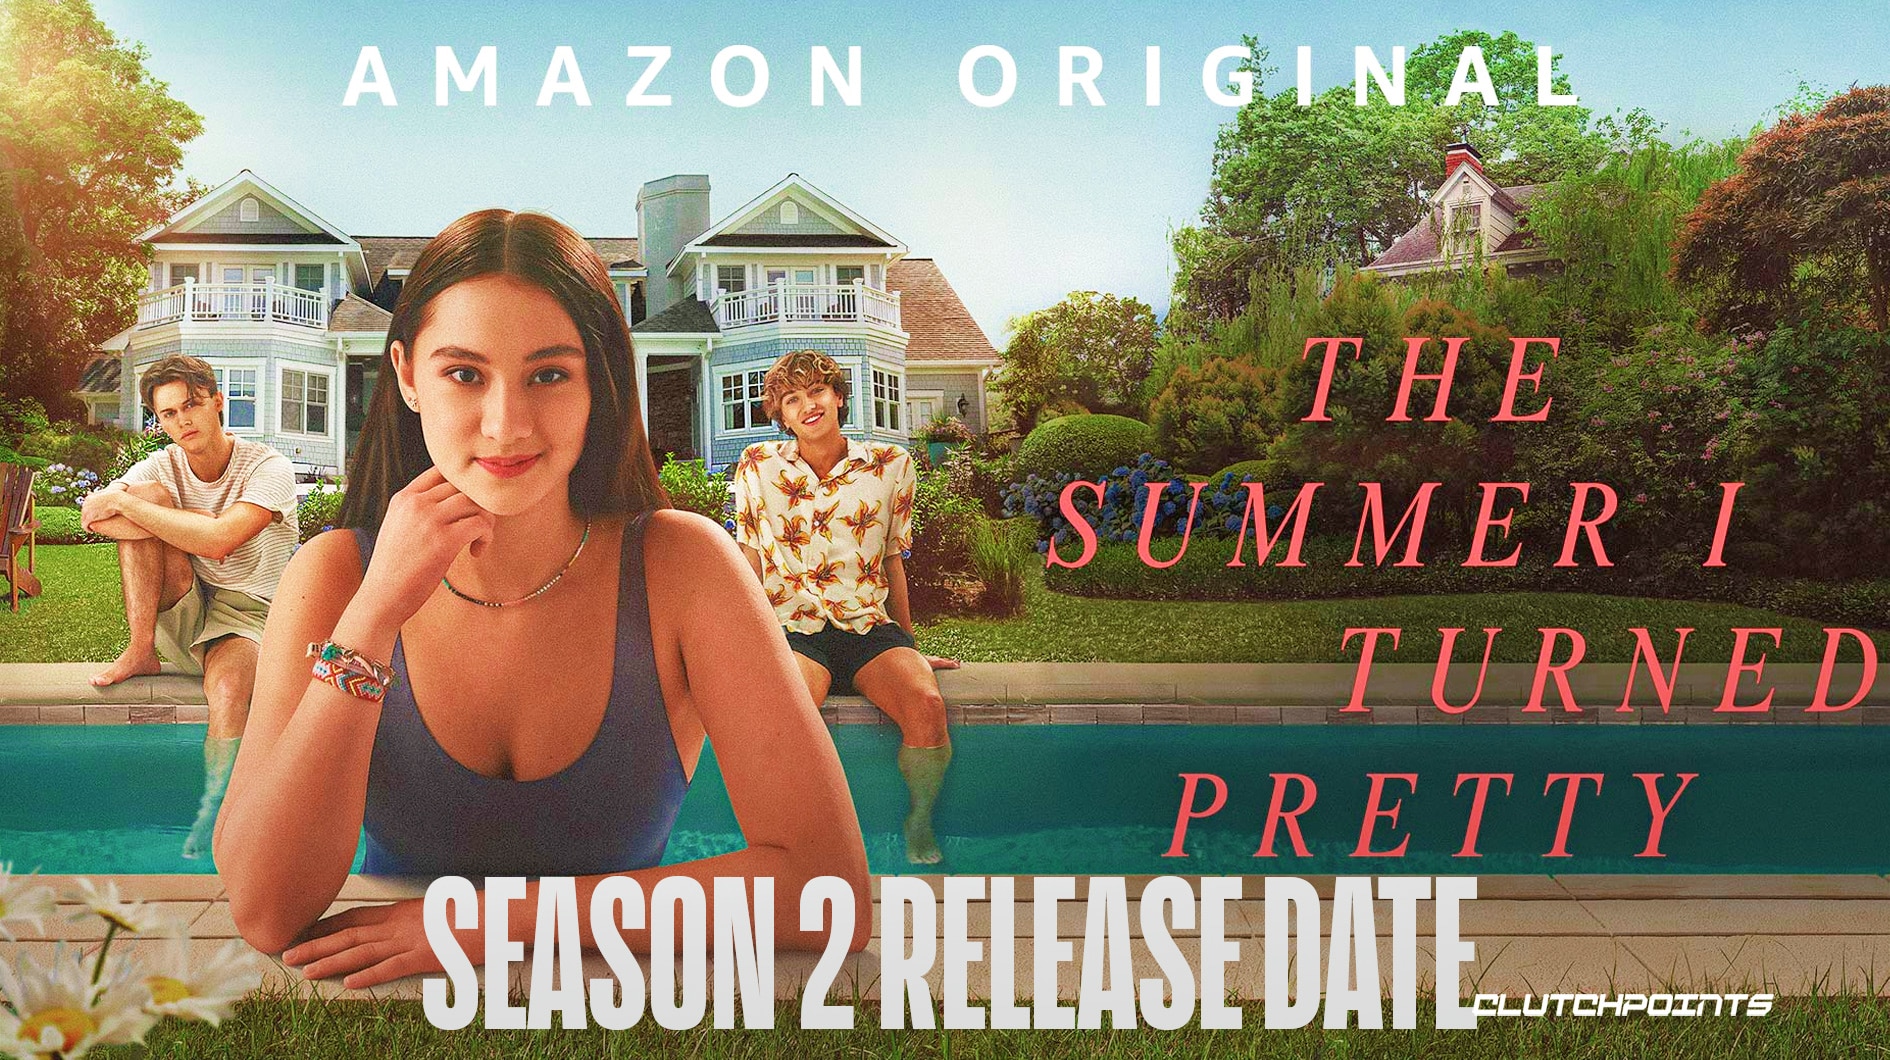 The Summer I Turned Pretty season 2 release schedule